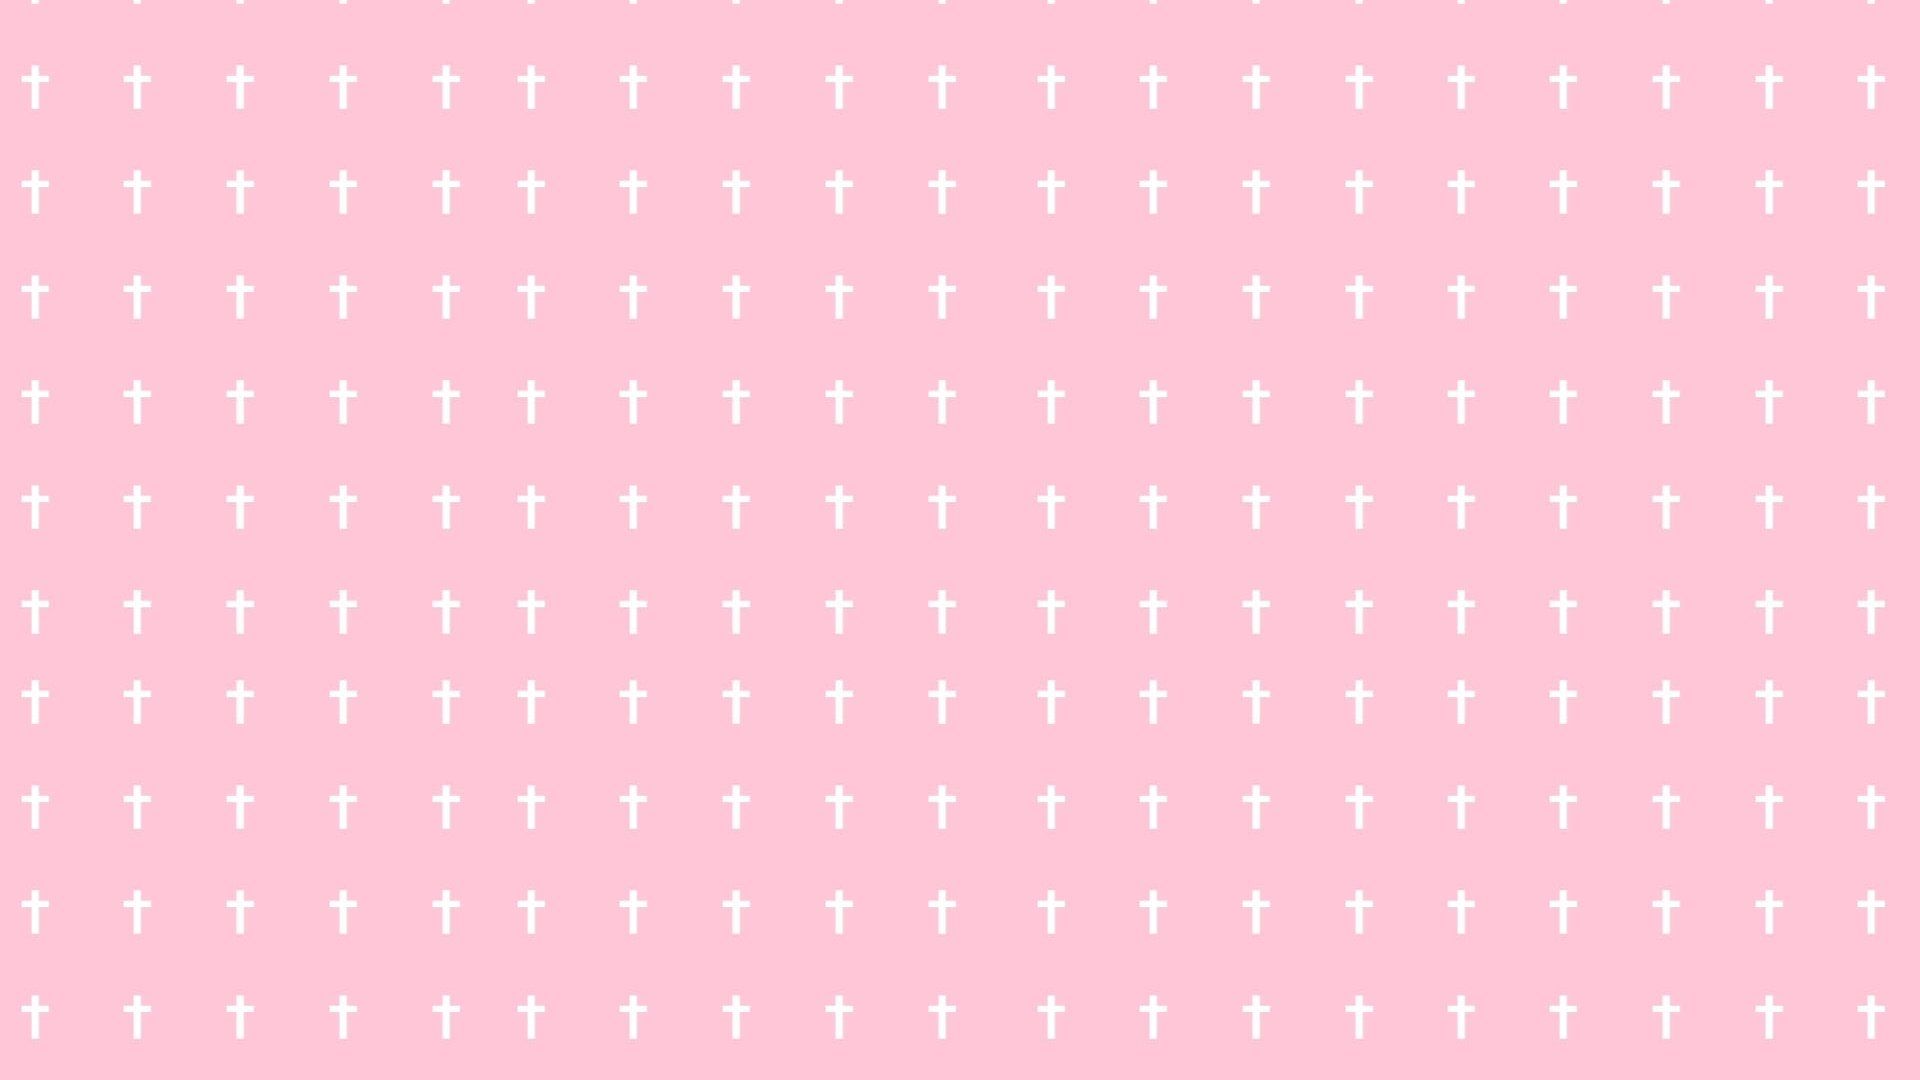 White crosses on a pink background - Kawaii, pastel